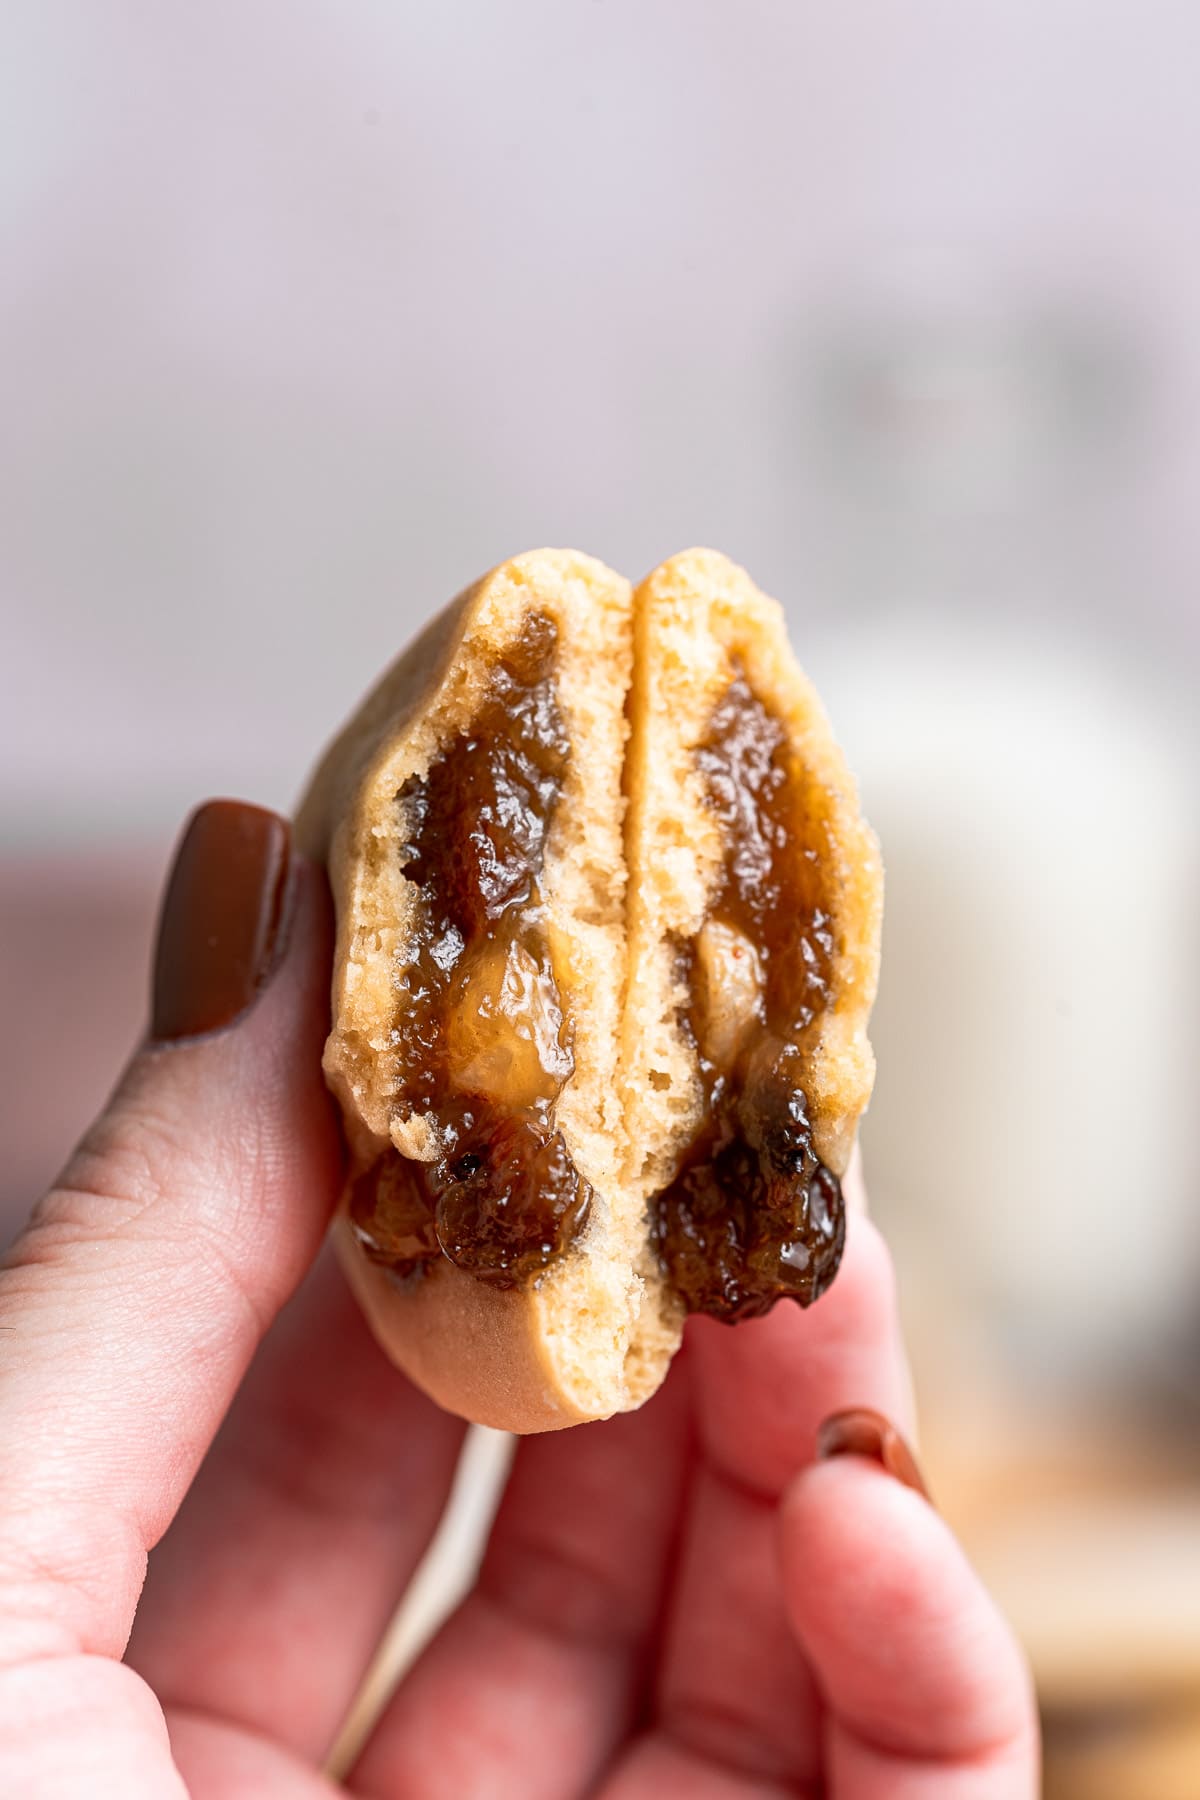 Raisin Filled Cookies in hand showing interior